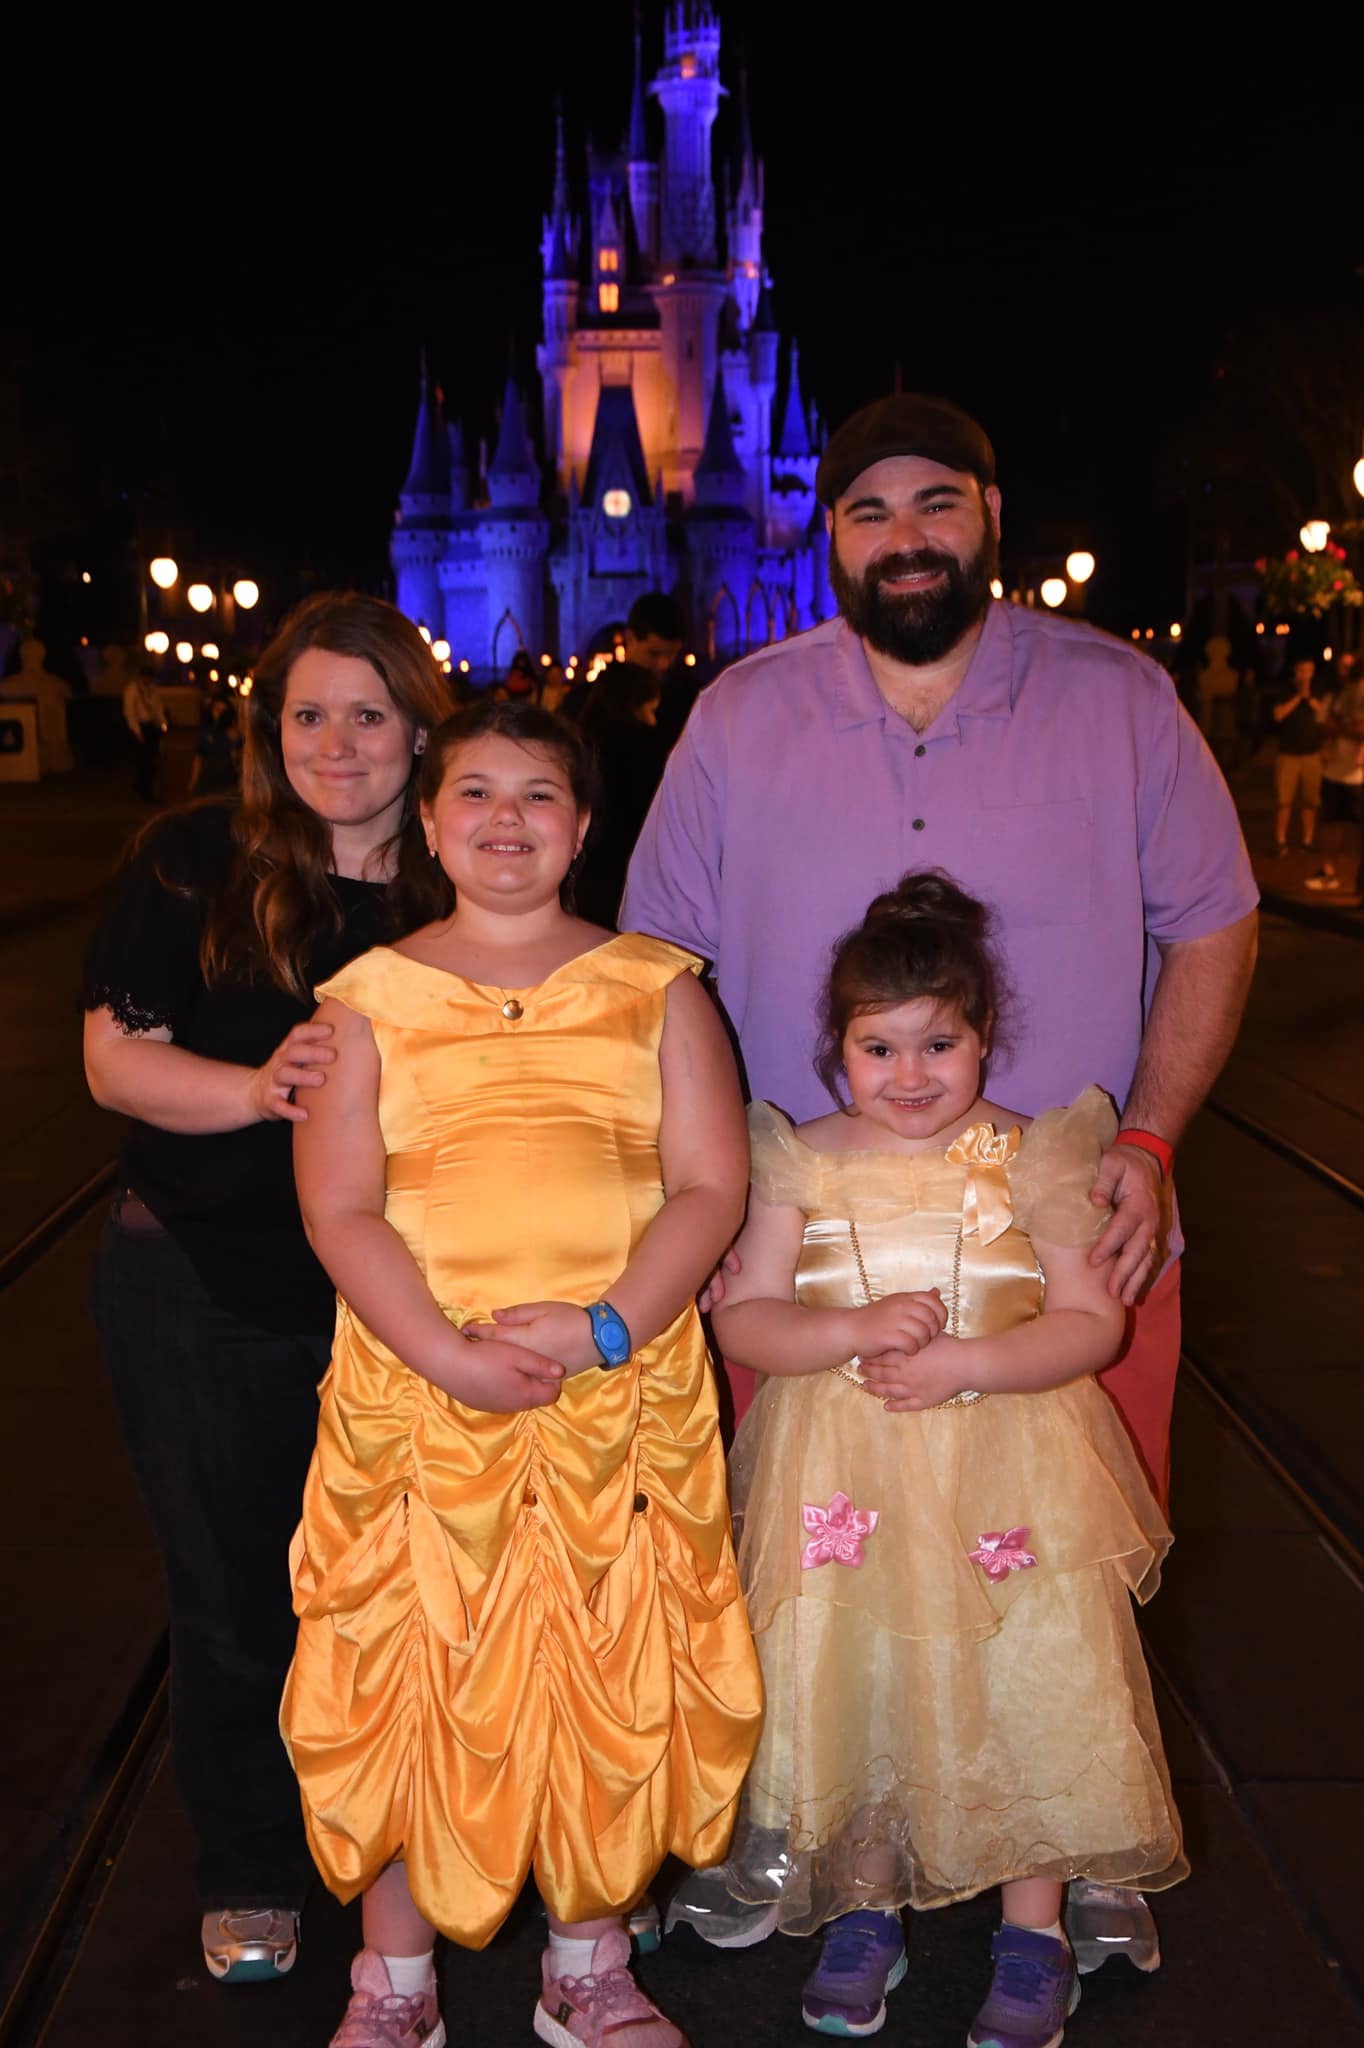 Family photo - Man, woman, two young daughters standing in front of Cinderella's castle at night